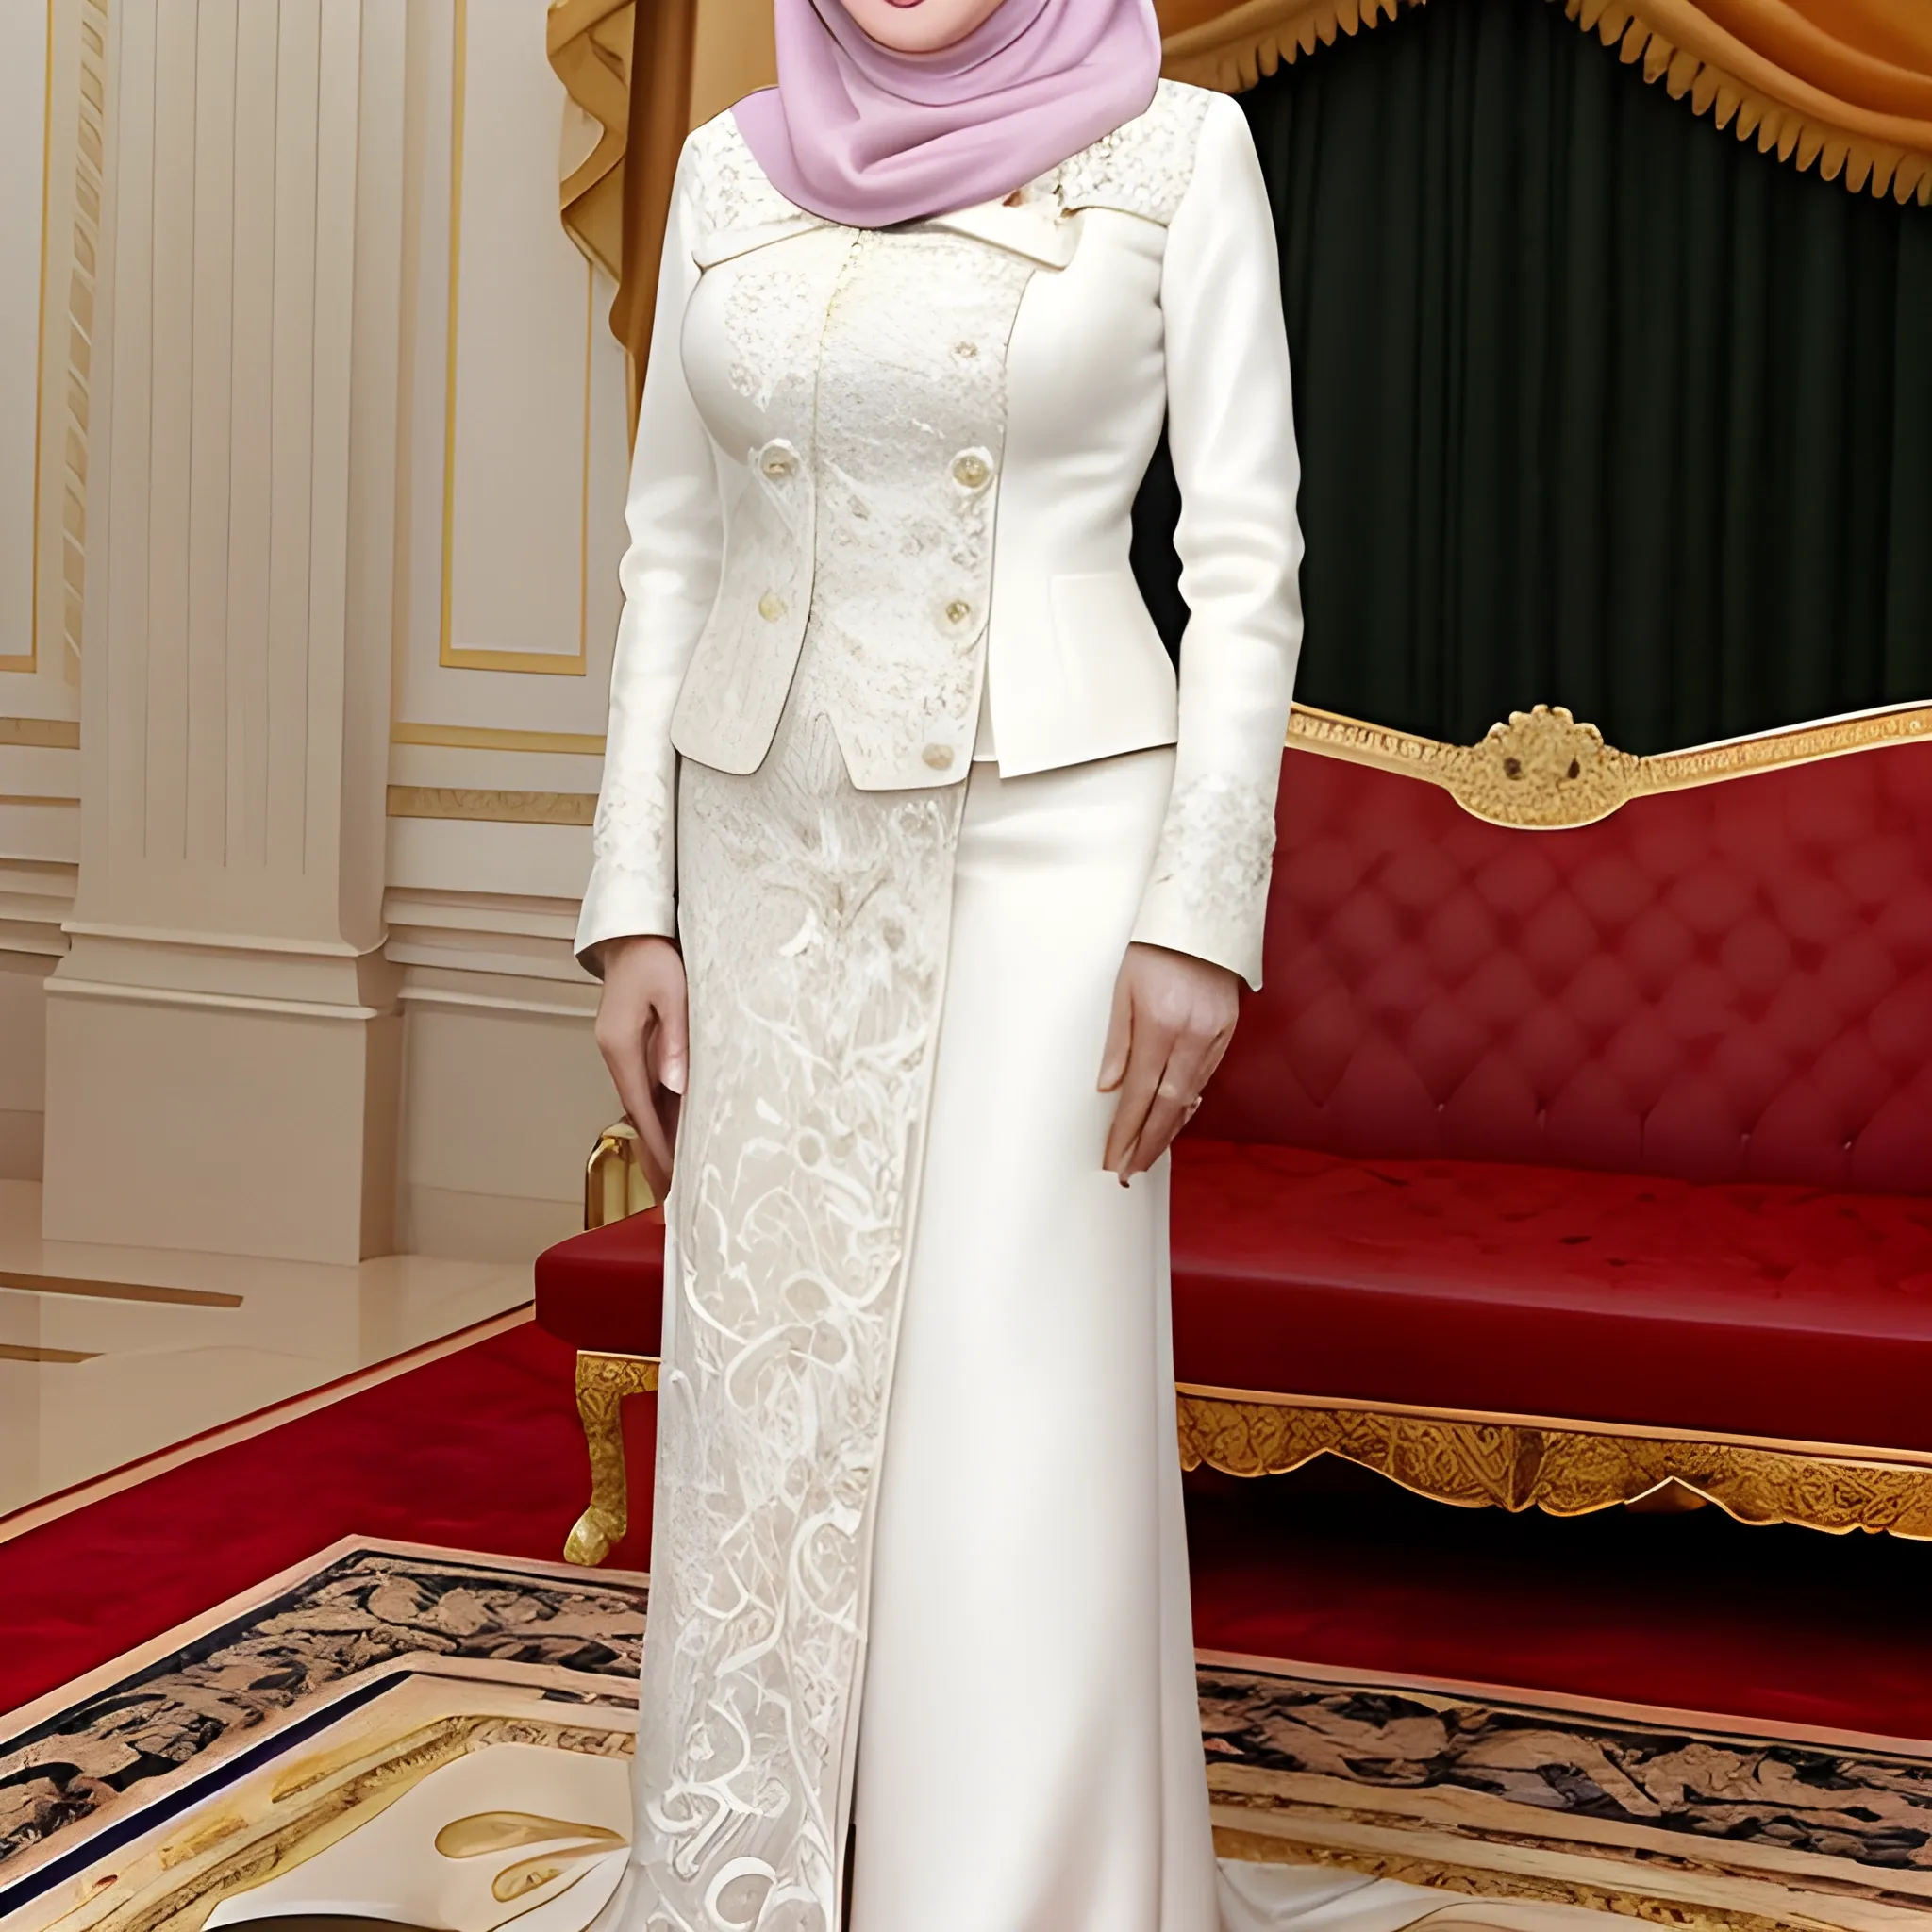 The wife of the president of Iran